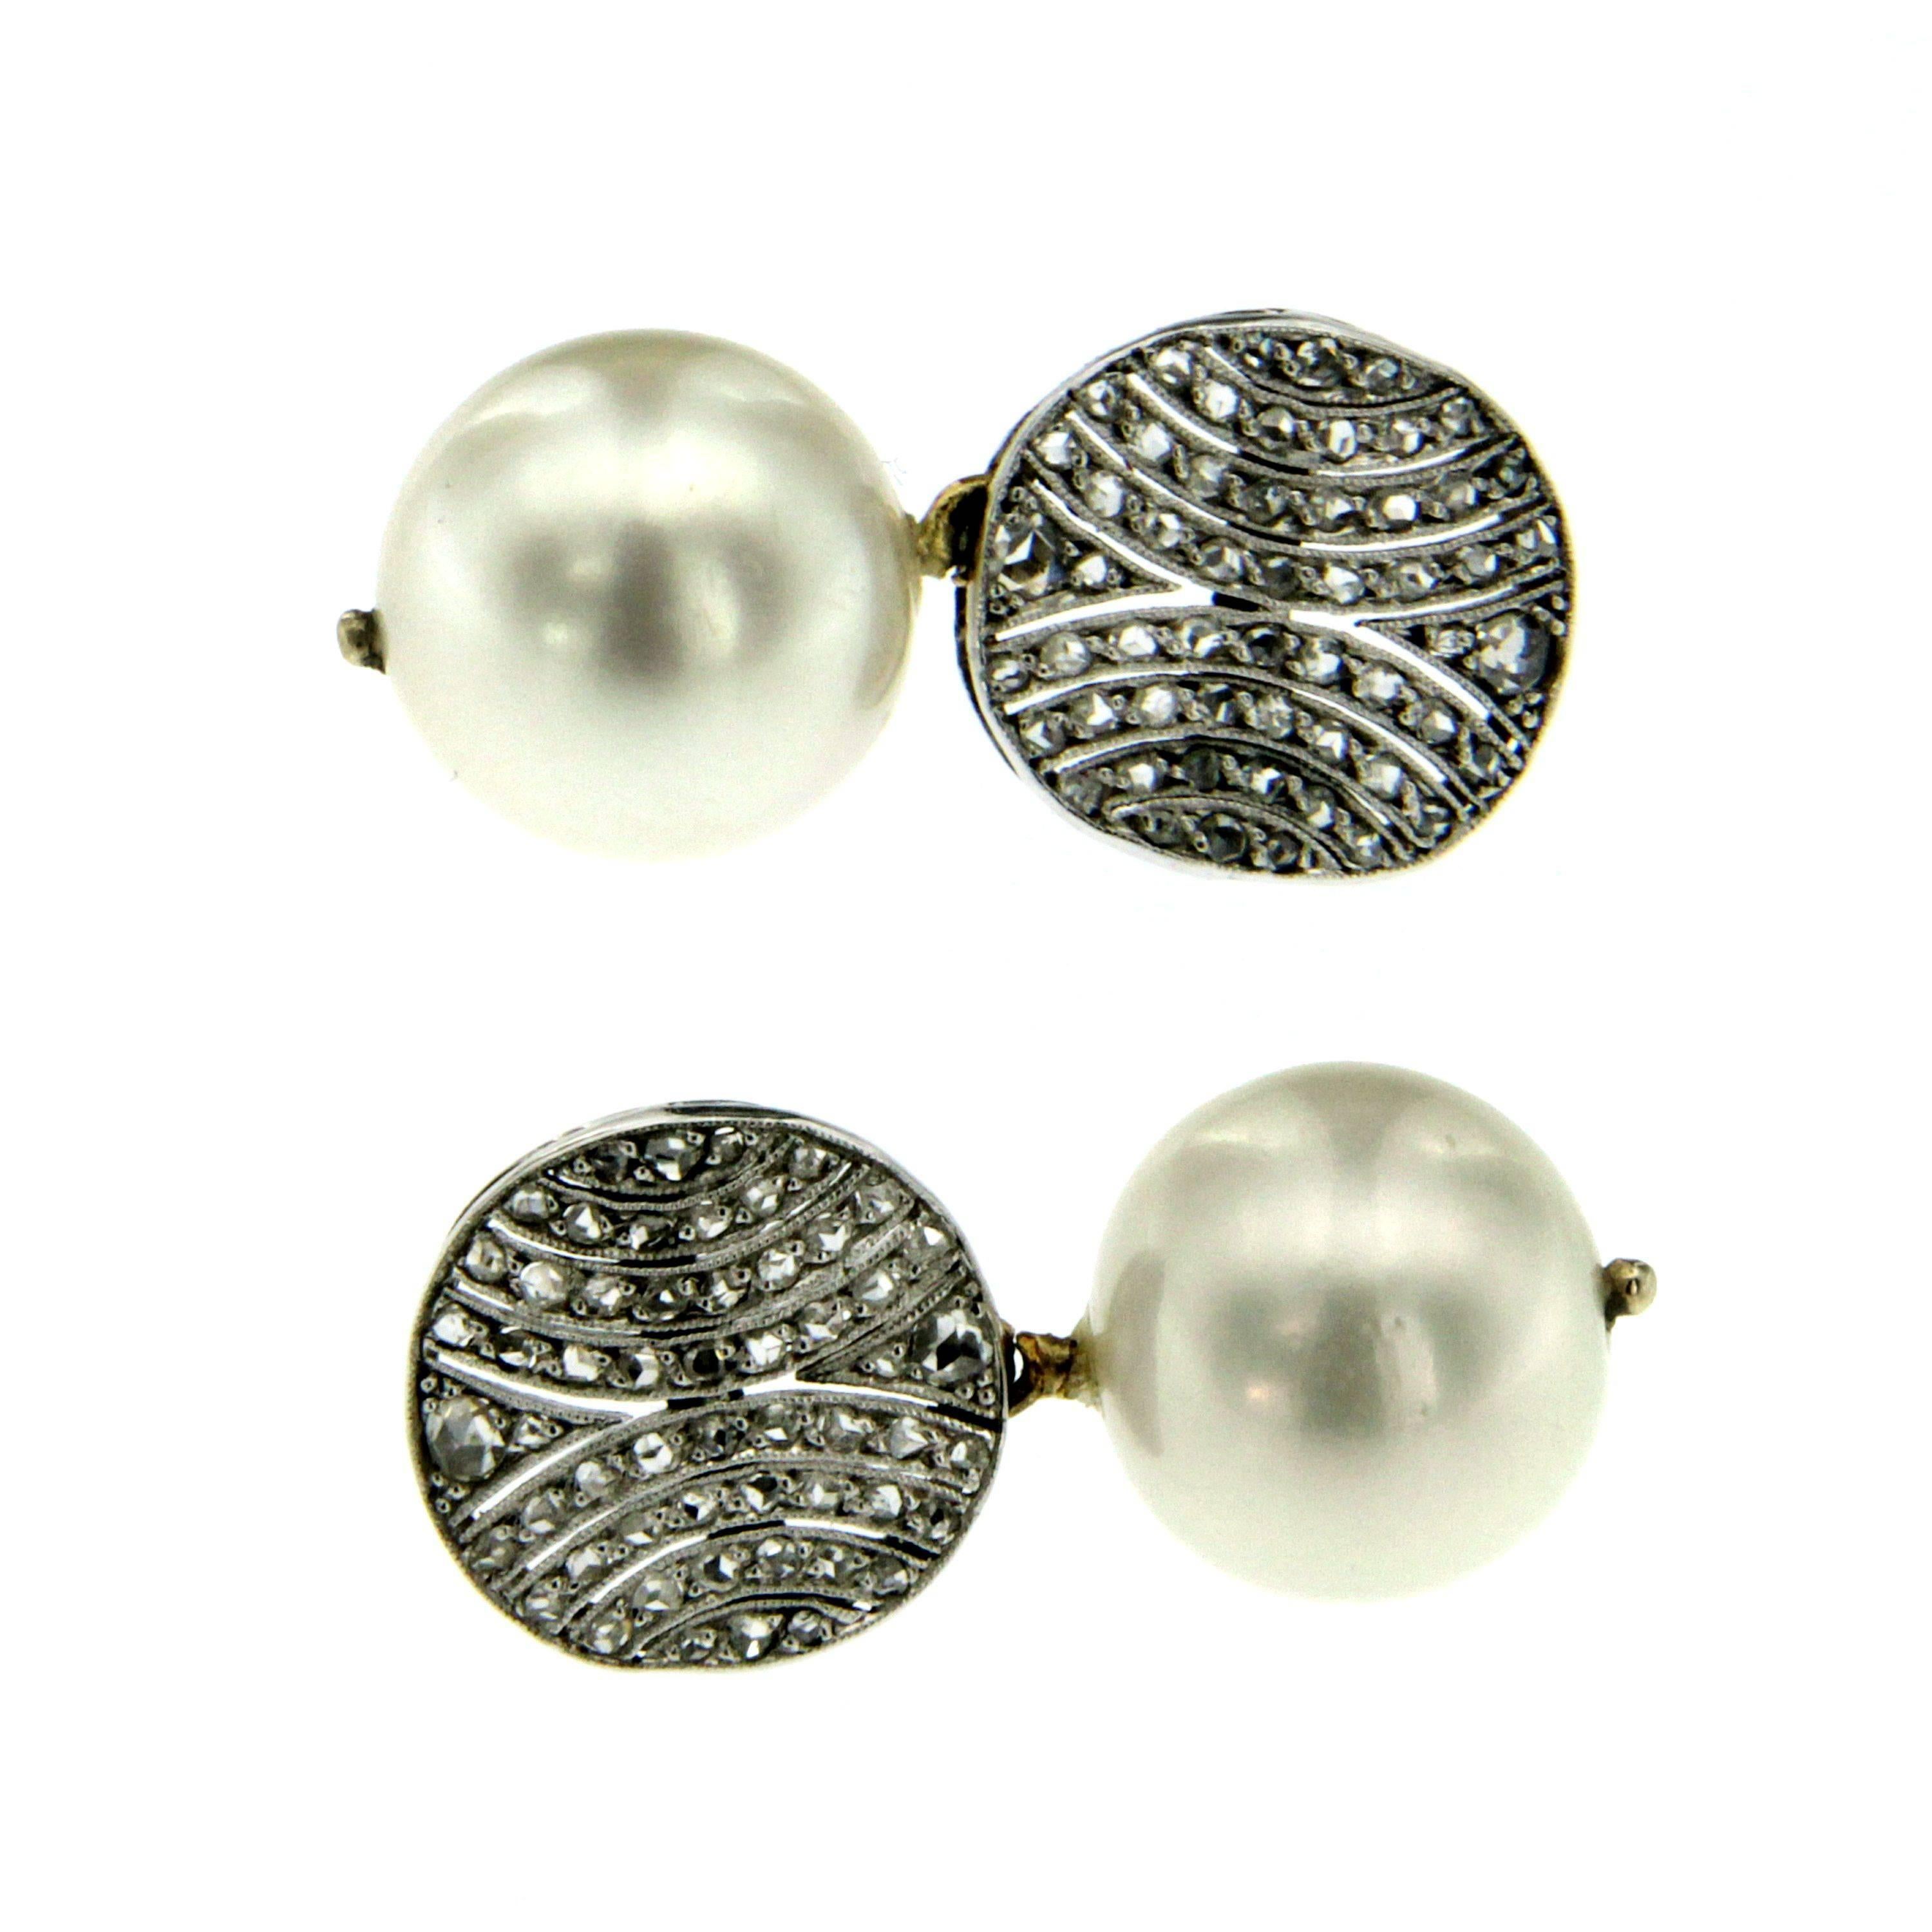 Vintage Earrings set with Diamonds and South Sea Pearls crafted in 18k white Gold, made circa 1980.
The pearls are suspended from 2 hemispheres set with european cut diamonds with a total weight of  0.90 carats.
Pearls measure 12.13 mm